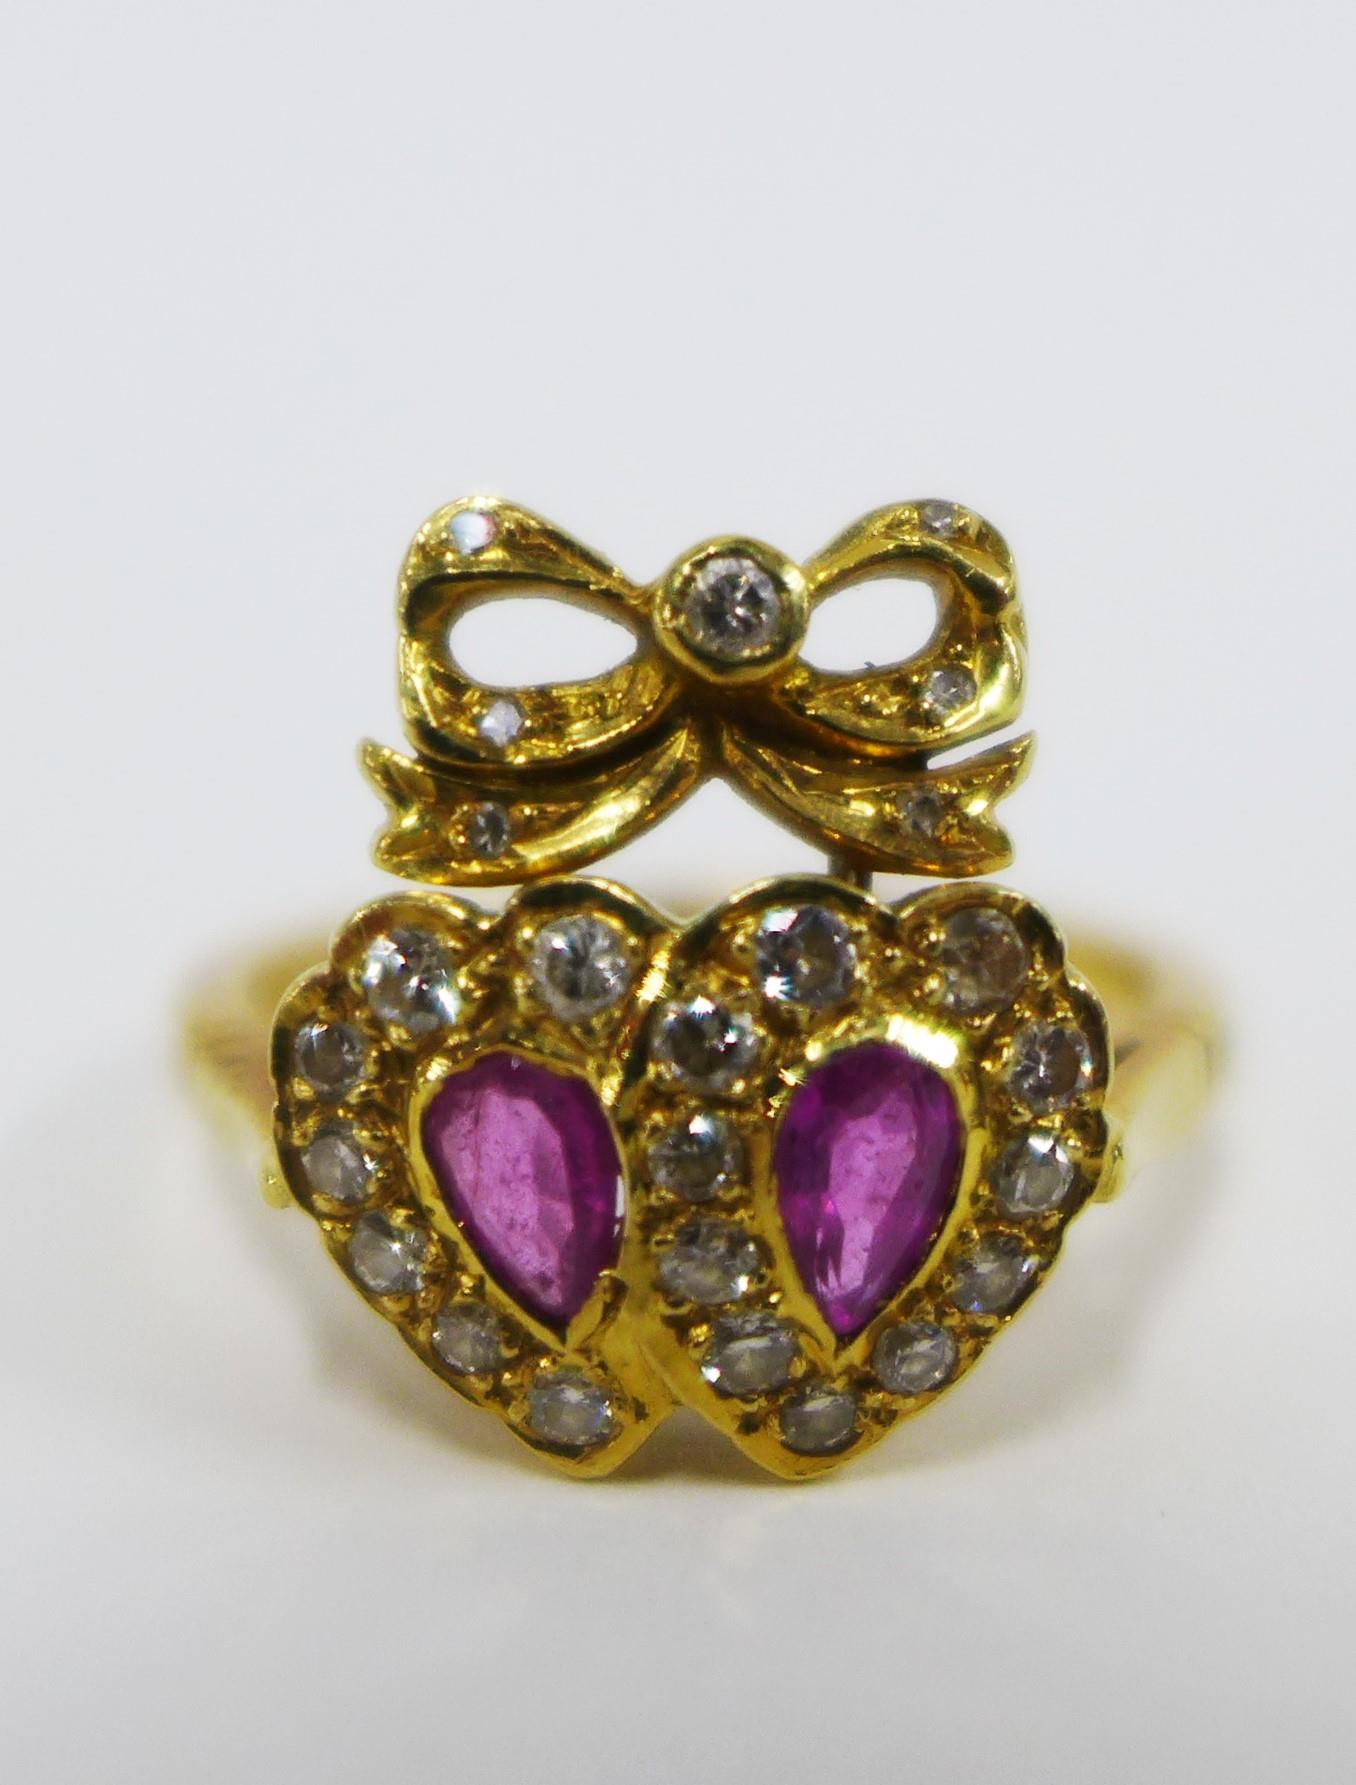 18ct gold ruby and diamond ring with a double heart and ribbon bow setting, London 1978